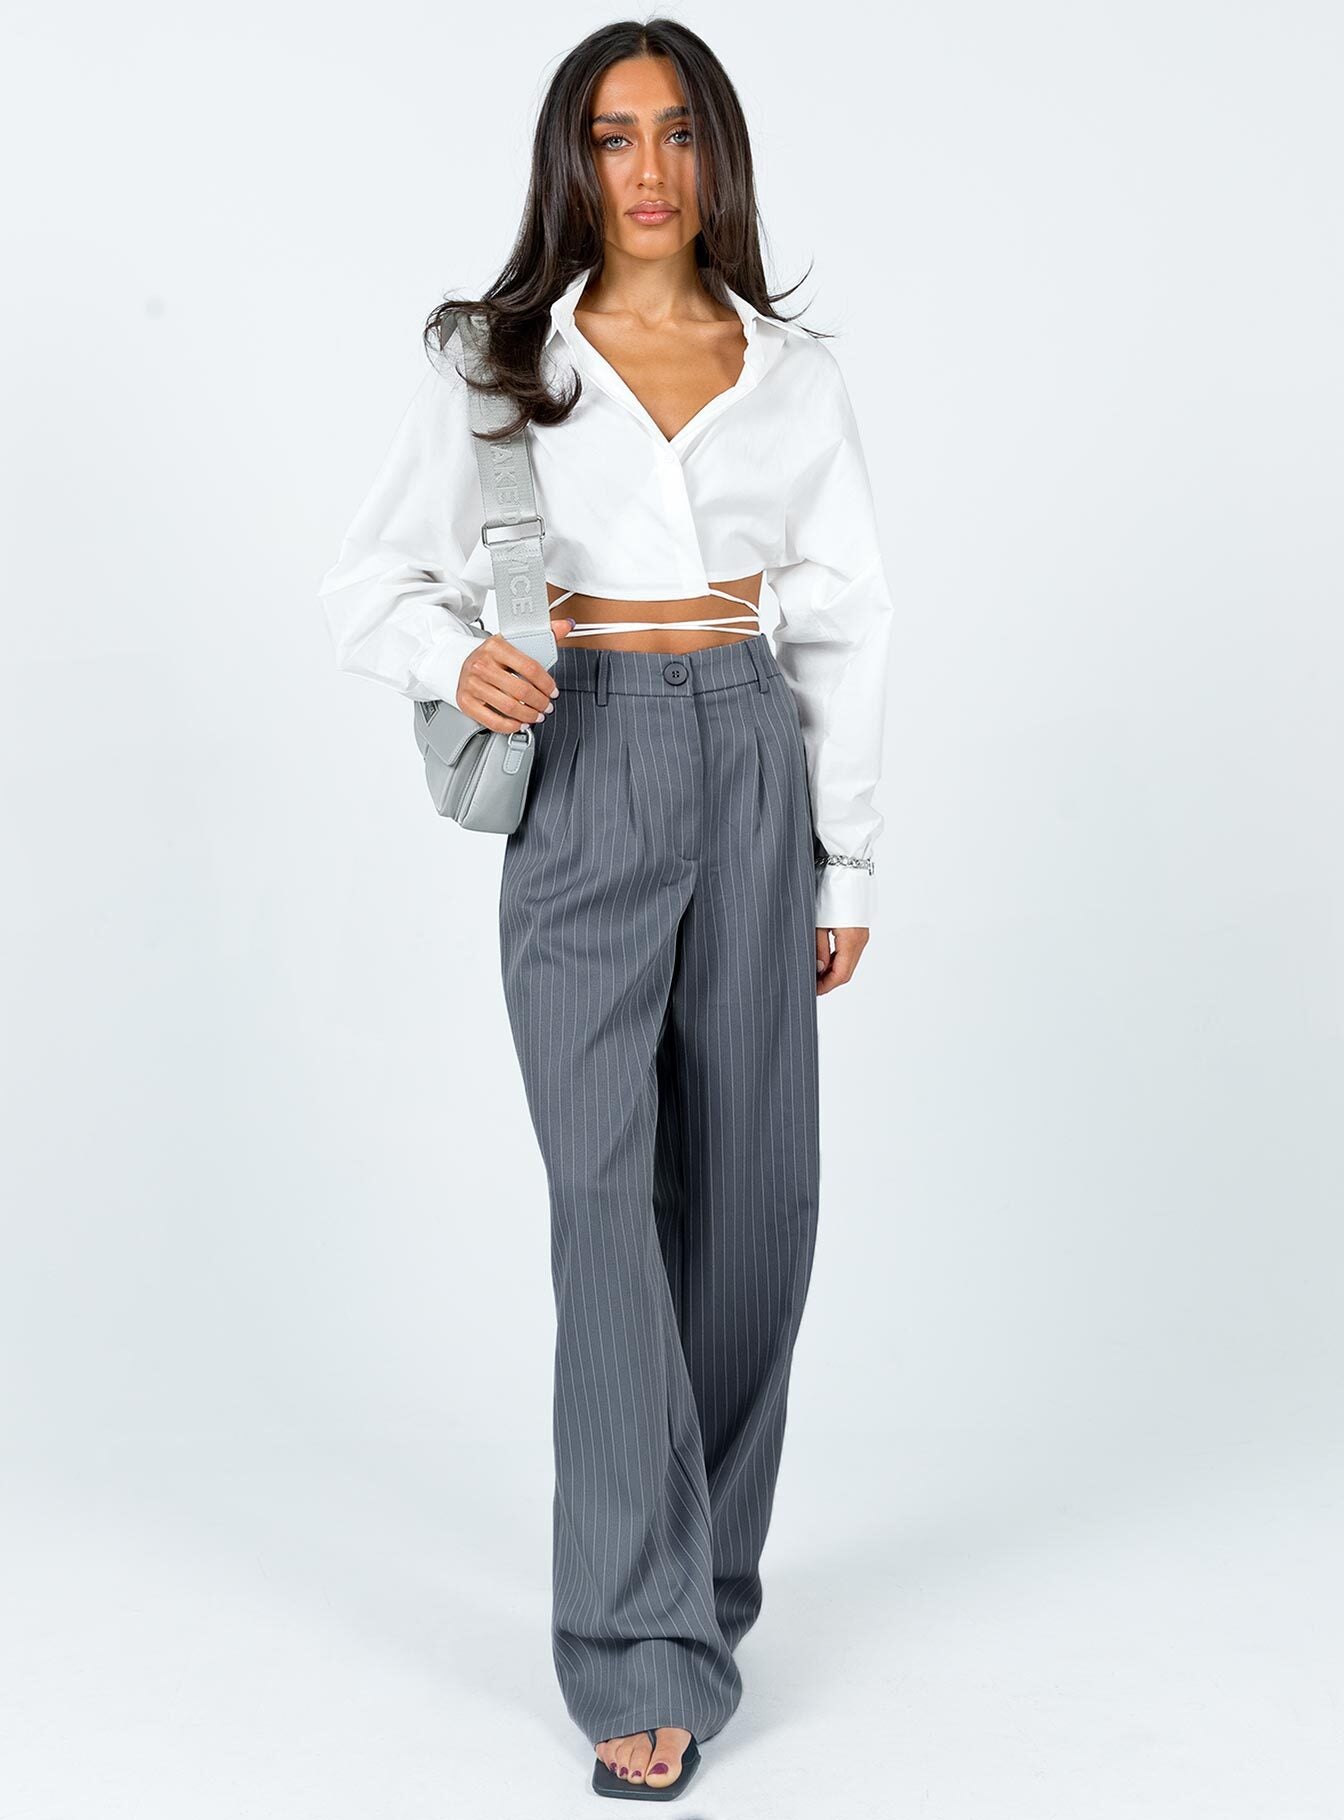 What to Wear with Women's Pinstripe Trousers this Fall - Creative Fashion